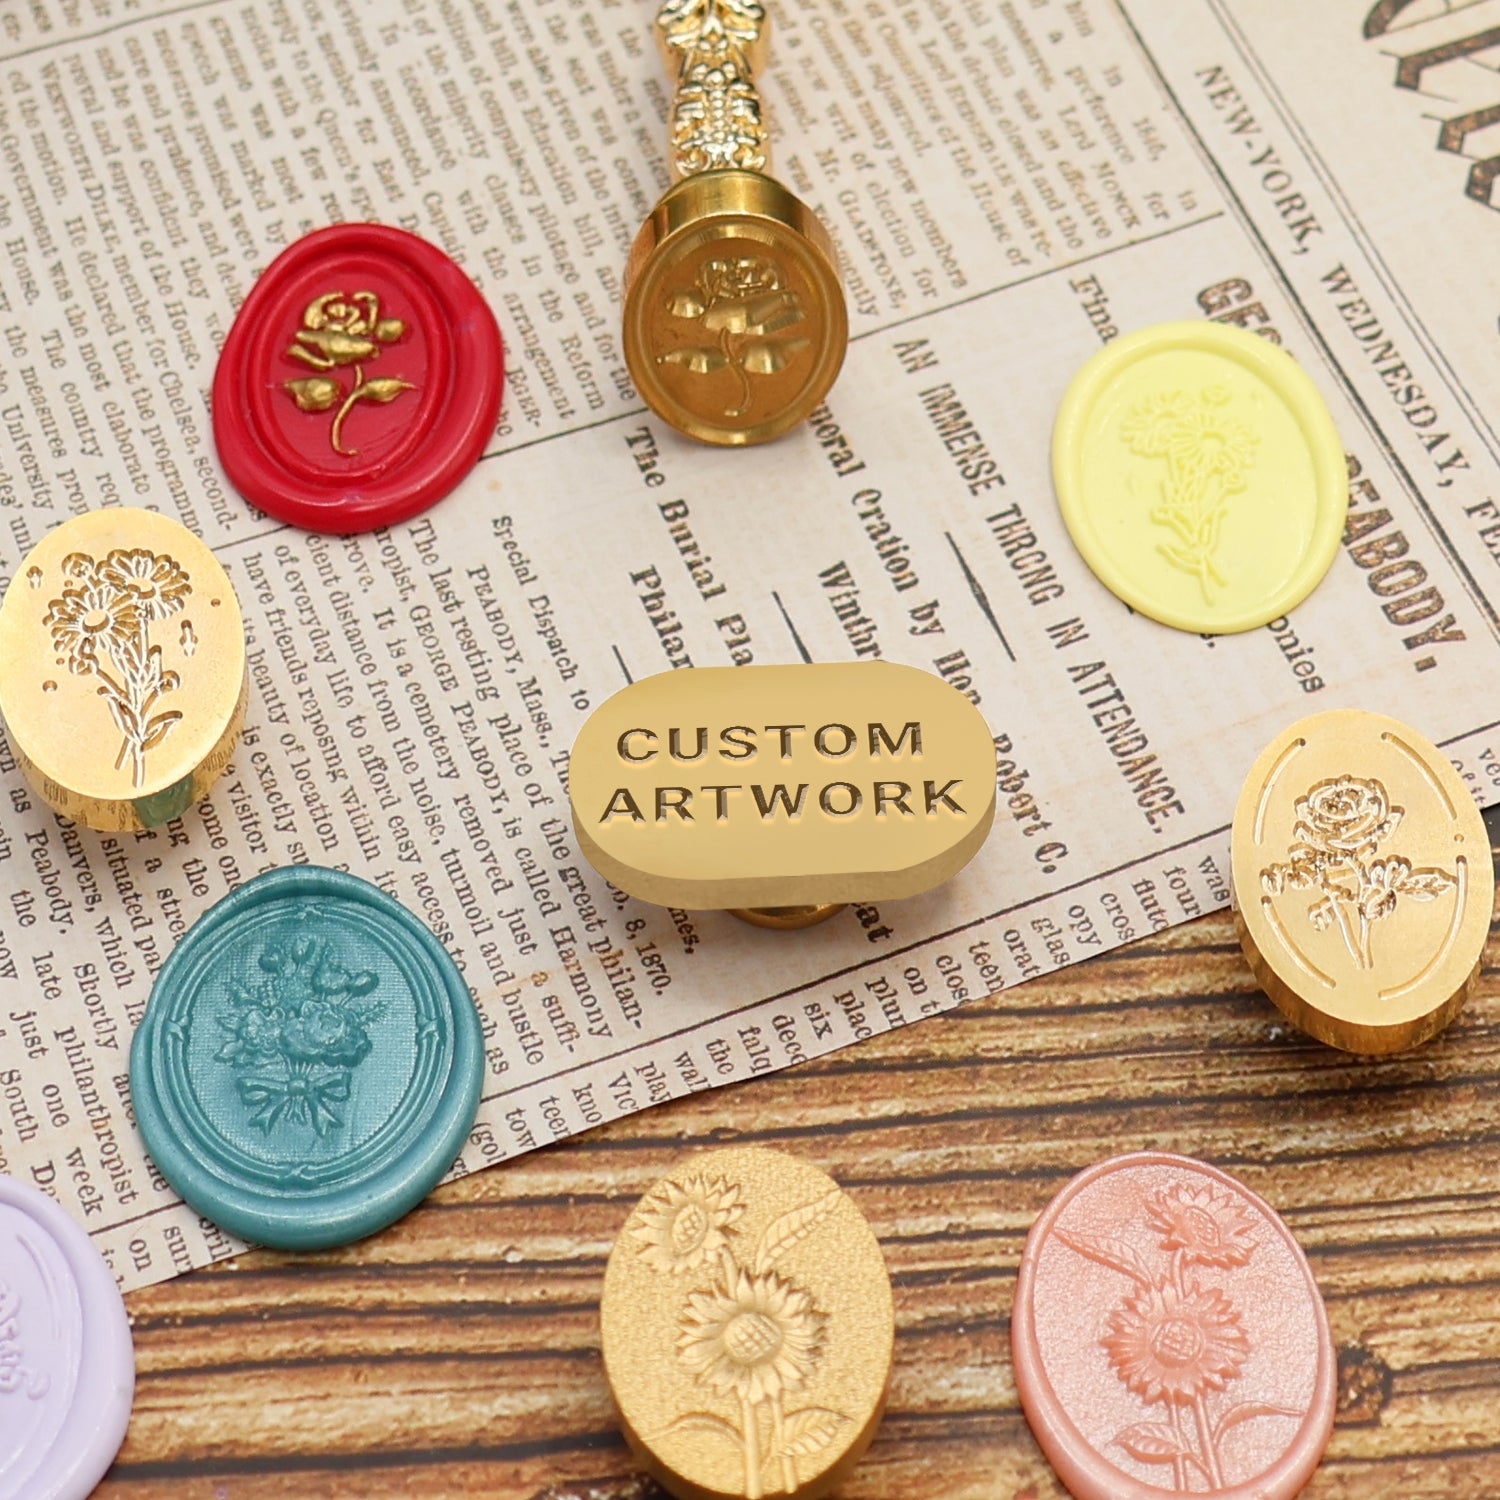 Oval Fully Customized Wax Seal Stamp with Your Own Artwork AD-1